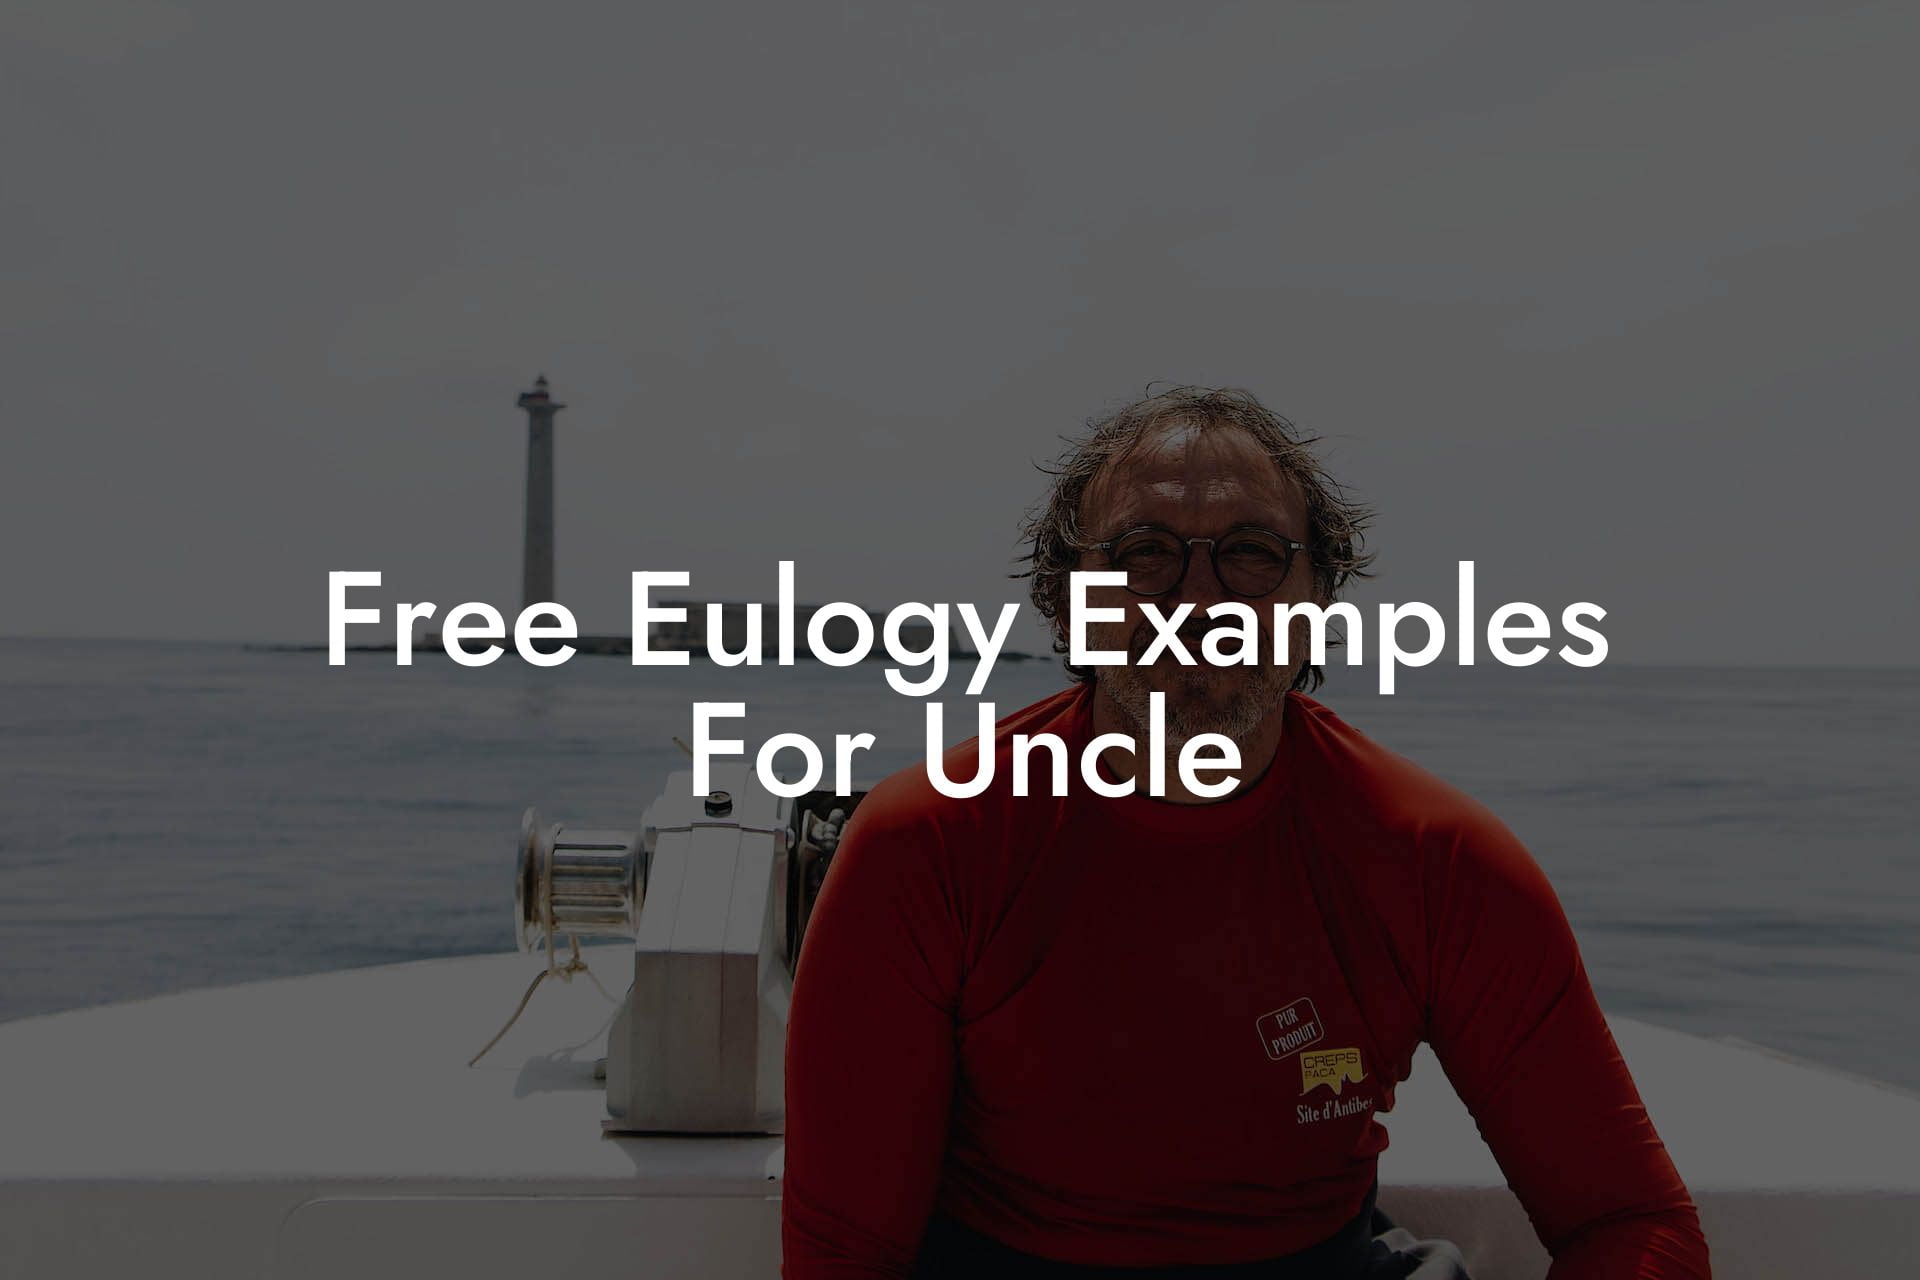 Free Eulogy Examples For Uncle